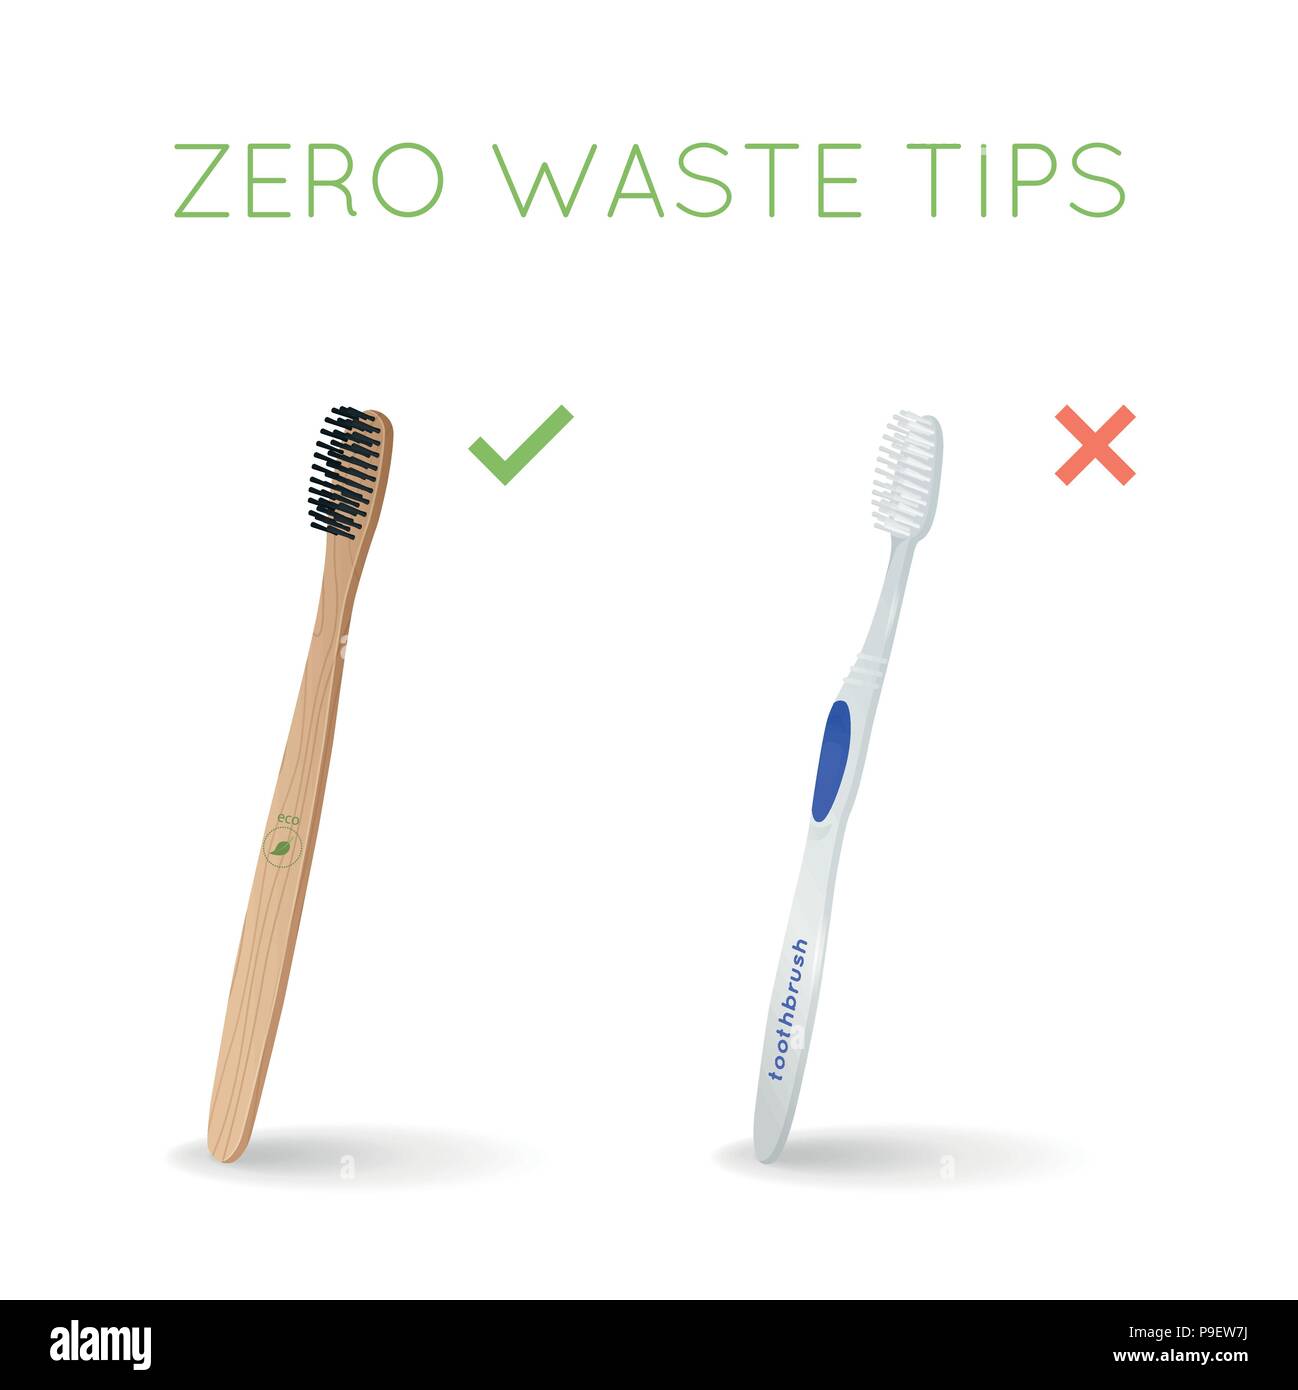 Bamboo toothbrush instead of plastic toothbrush. Zero waste tips. Eco and healthy lifestyle Stock Vector